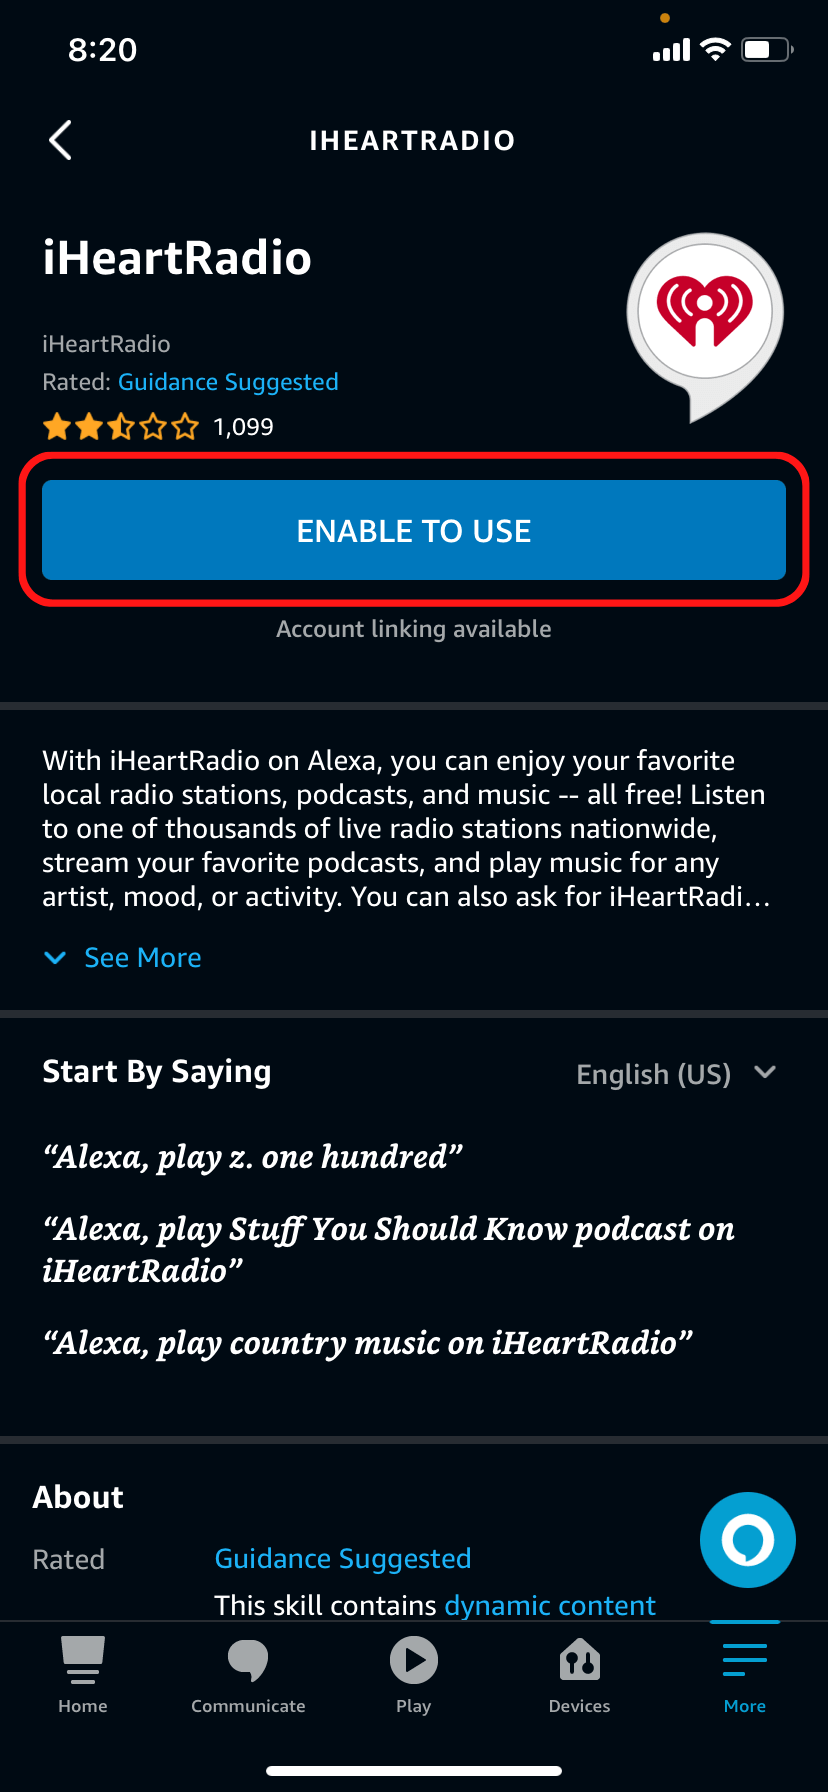 The iHeartRadio skill in the Alexa app music page.